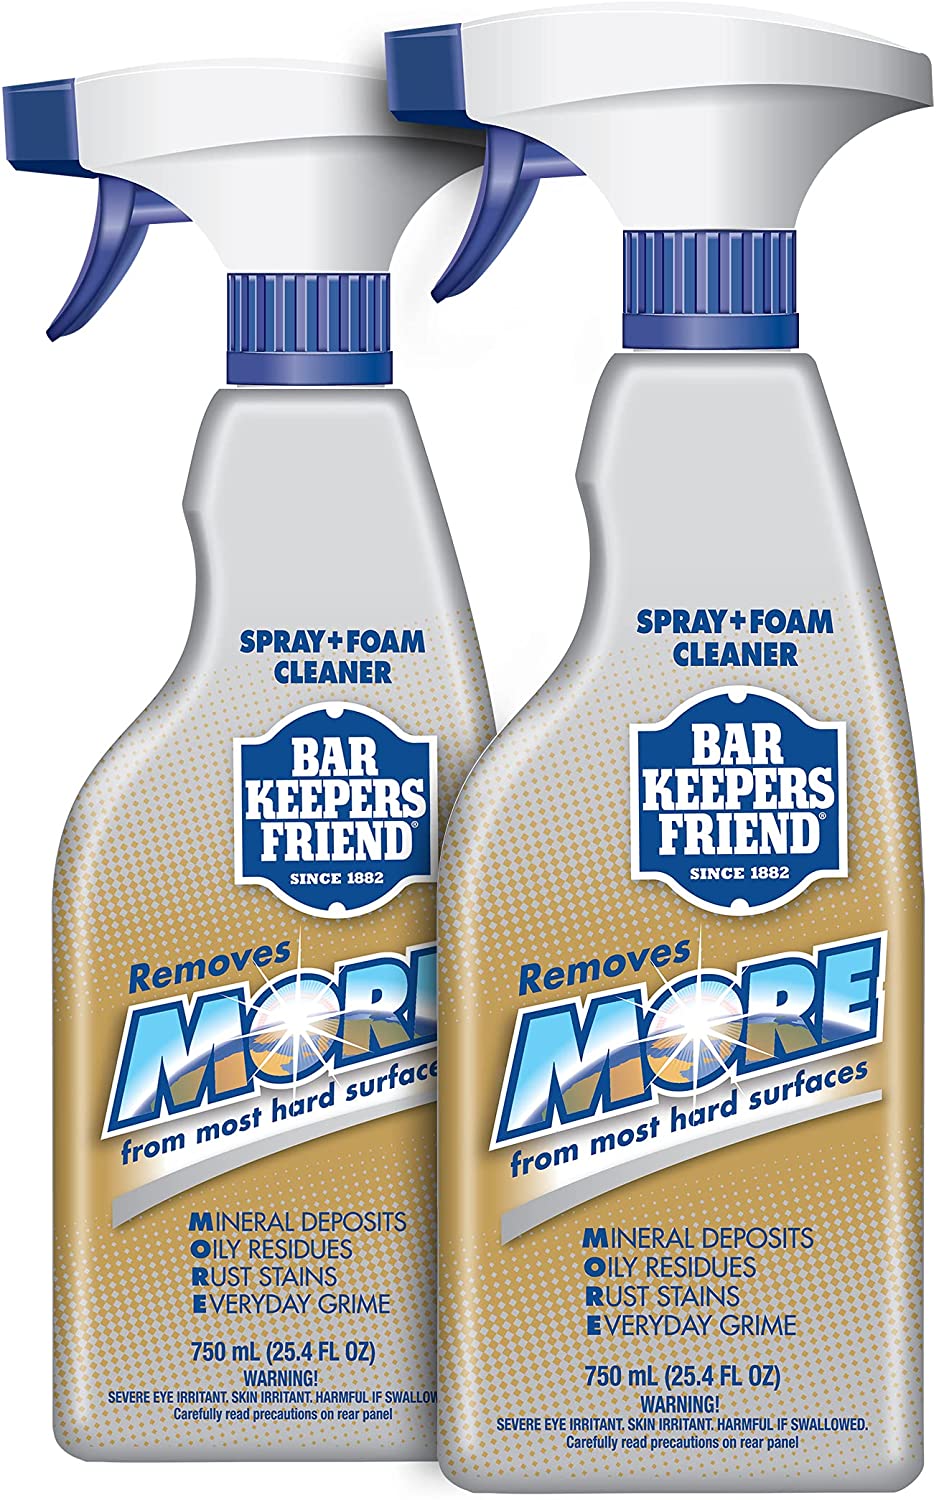 Bar Keepers Friend Cookware Powder & MORE Spray Value Twin Pack - 2x25.4oz/6pk